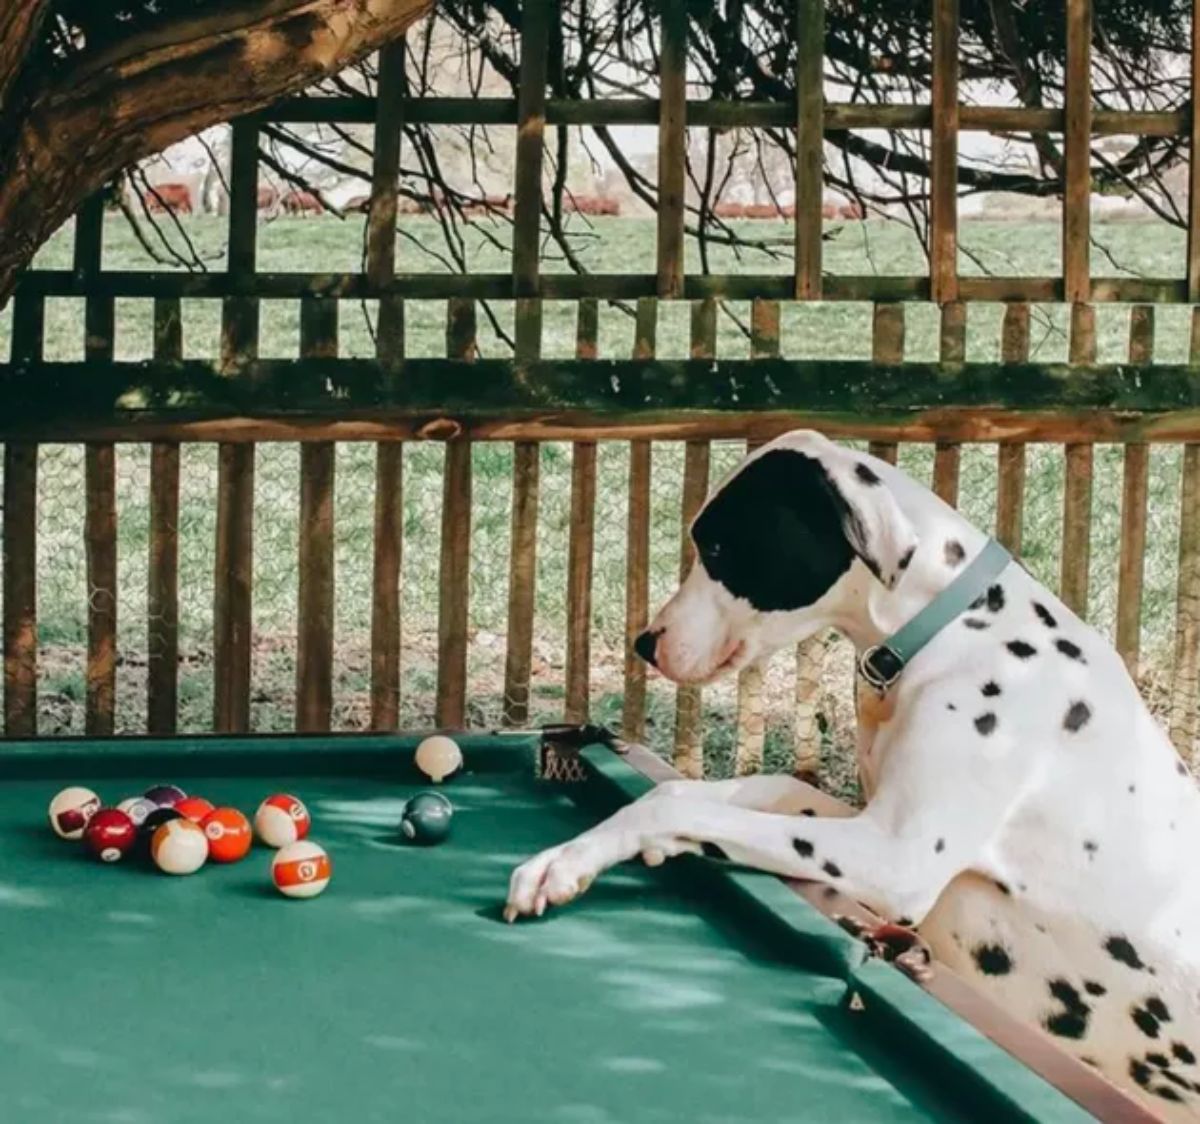 black and white great dane standing on hind legs with the front paws on a green pool table